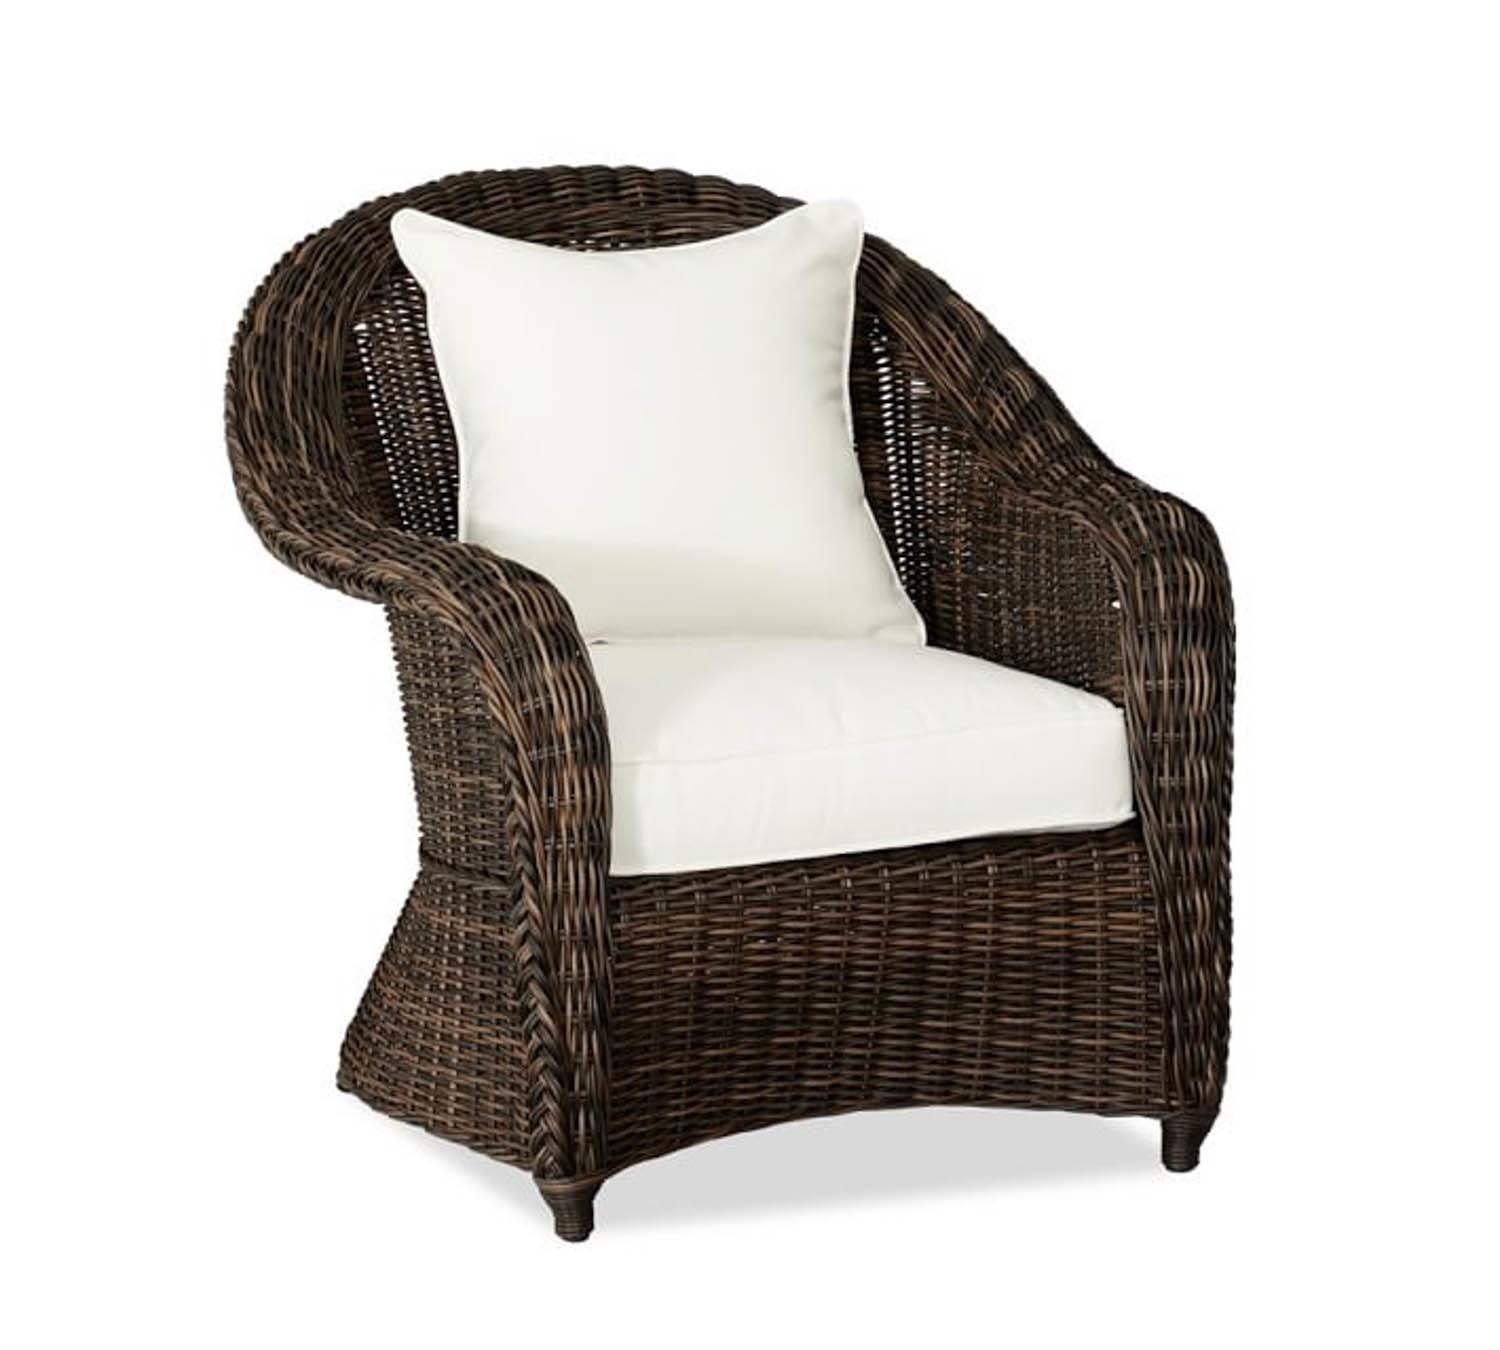 Wicker Lounge Chair Large / Amazon Com Super Patio Outdoor Chaise